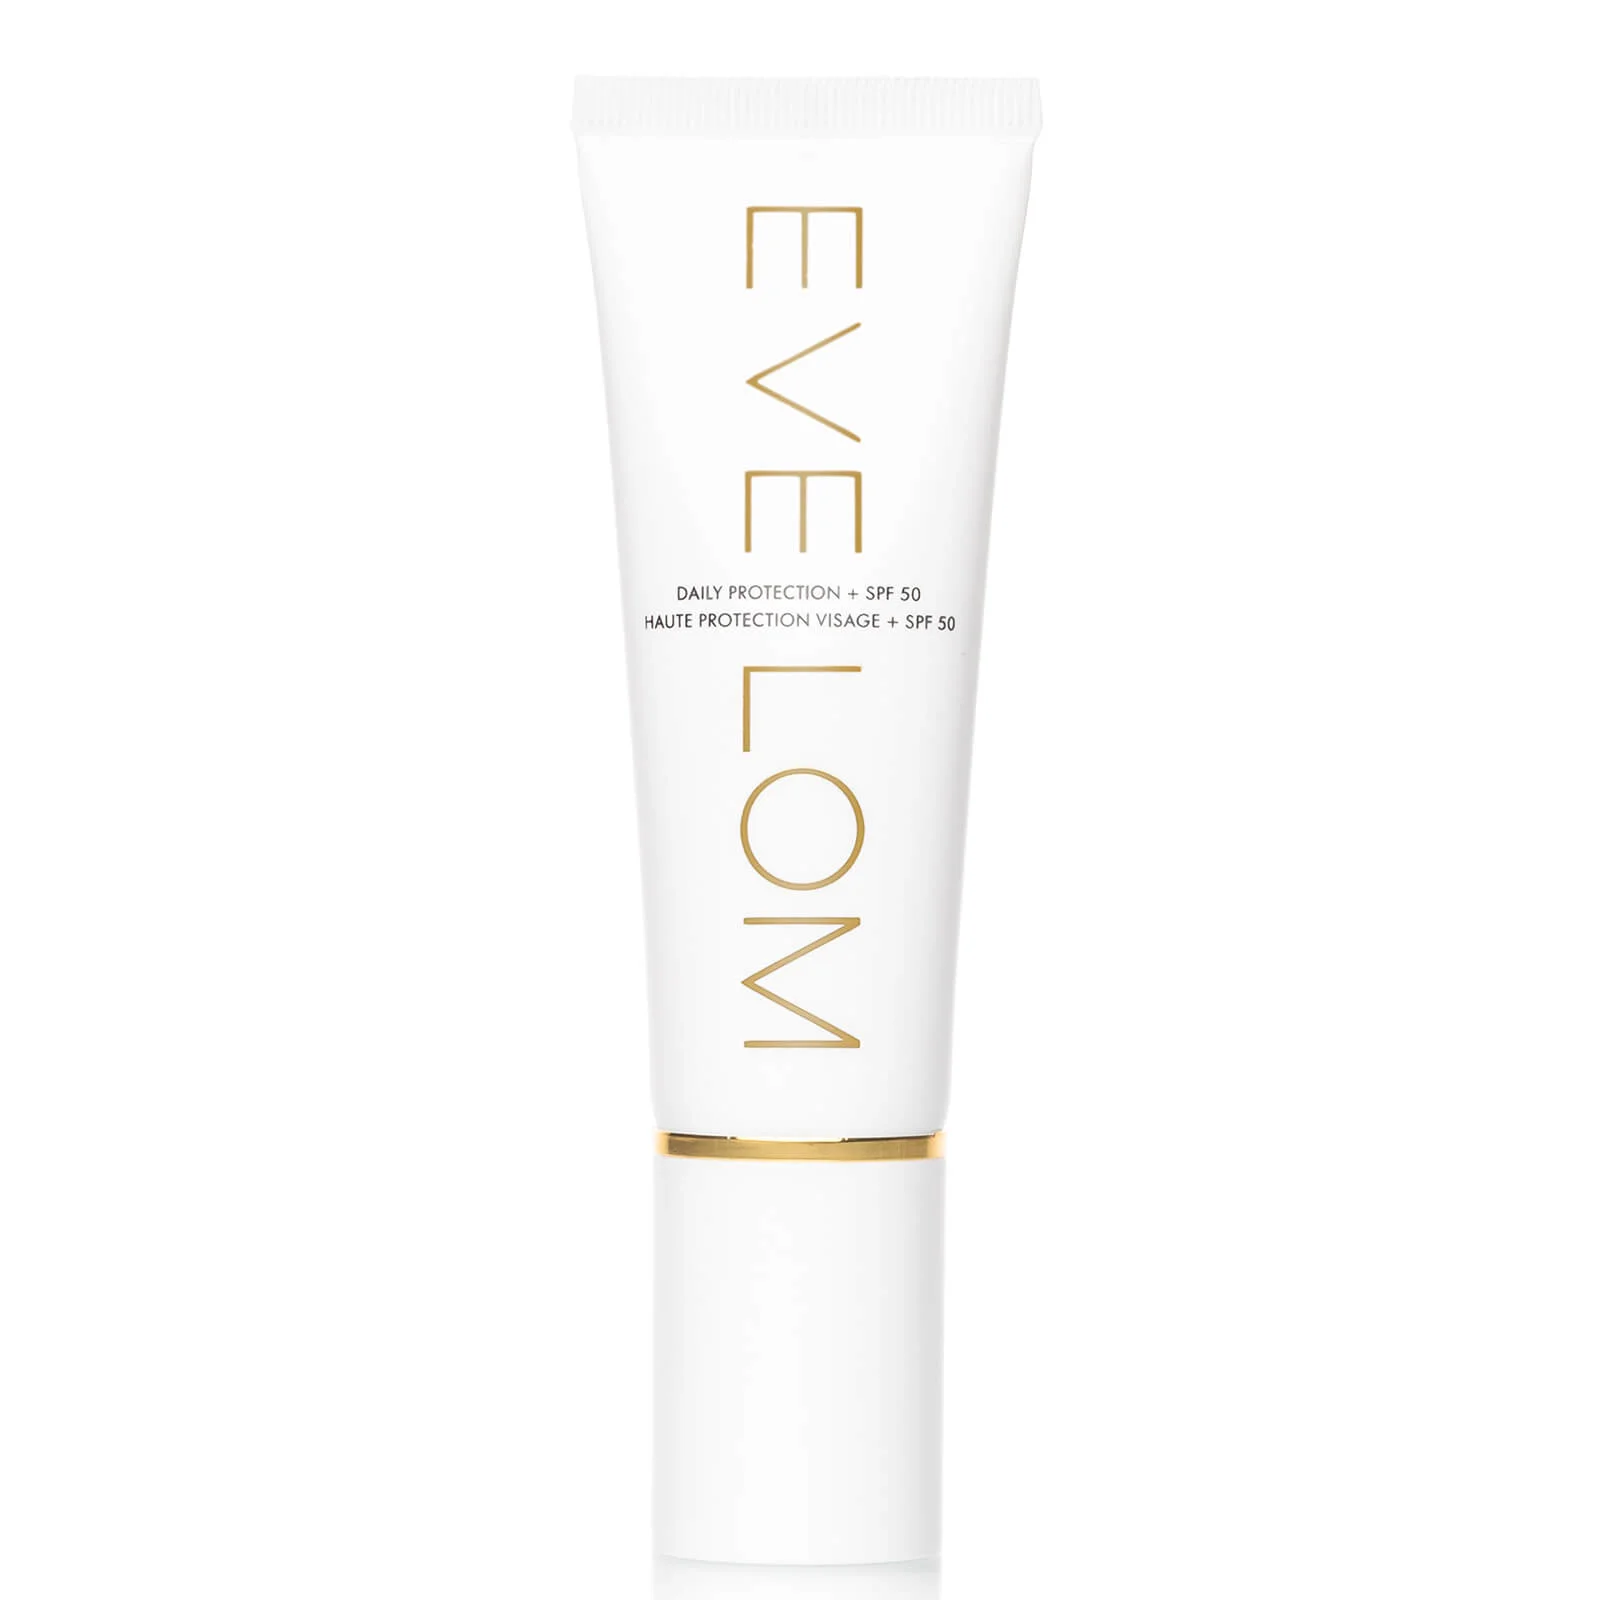 Eve Lom Daily Protection + SPF 50 50ml Image 1